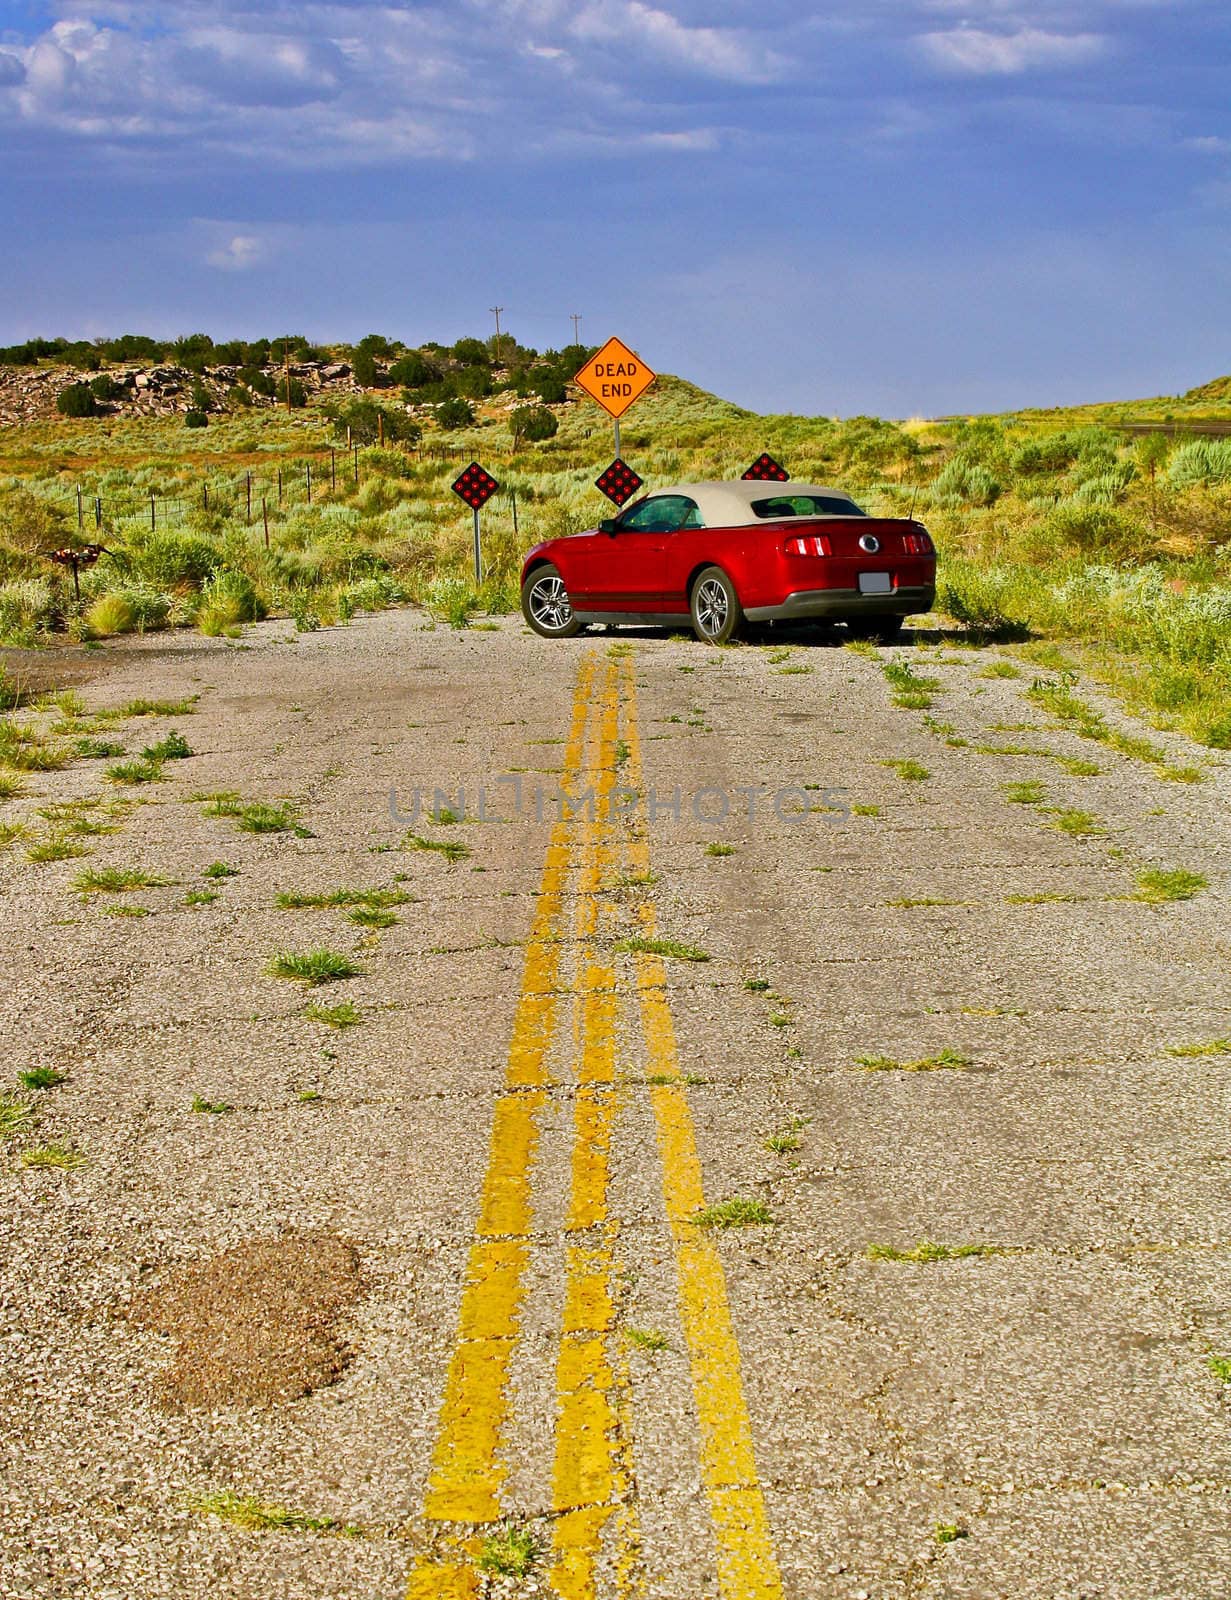 End of old part of Route 66 road with Red Car